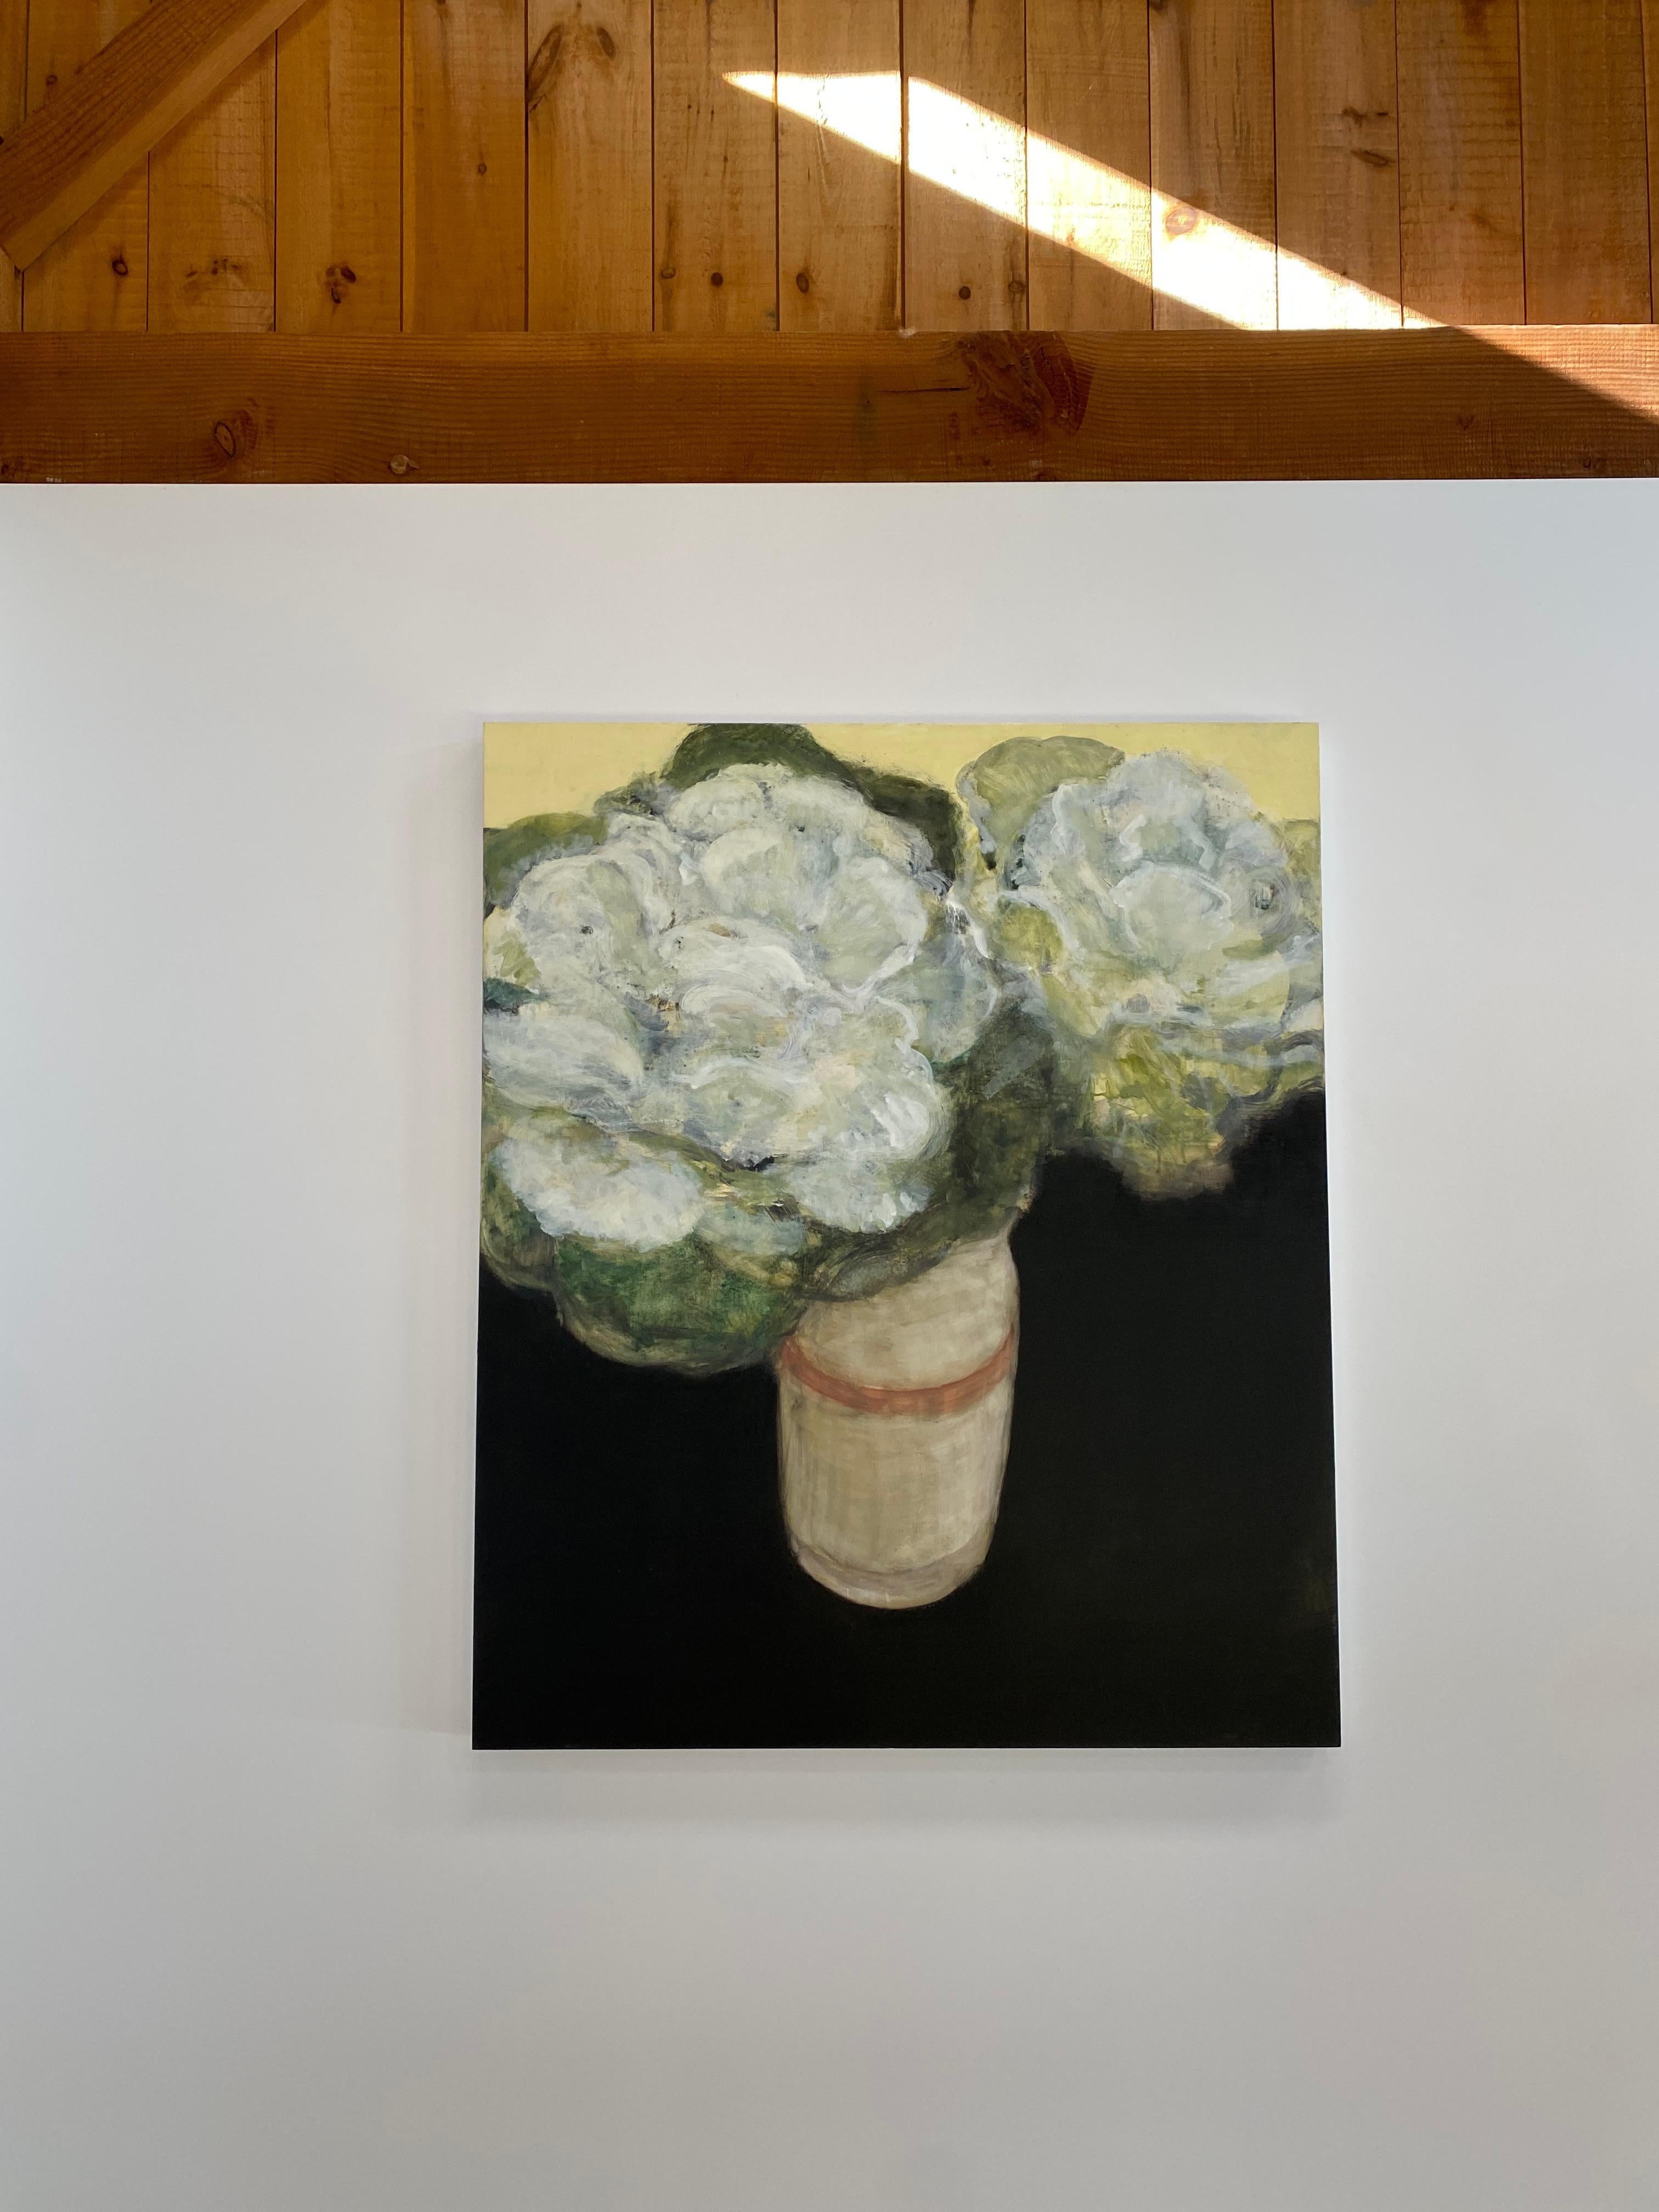 Cabbage Rose, White Flowers in Vase, Light Yellow, Black, Ivory, Beige Blossoms - Contemporary Painting by David Konigsberg